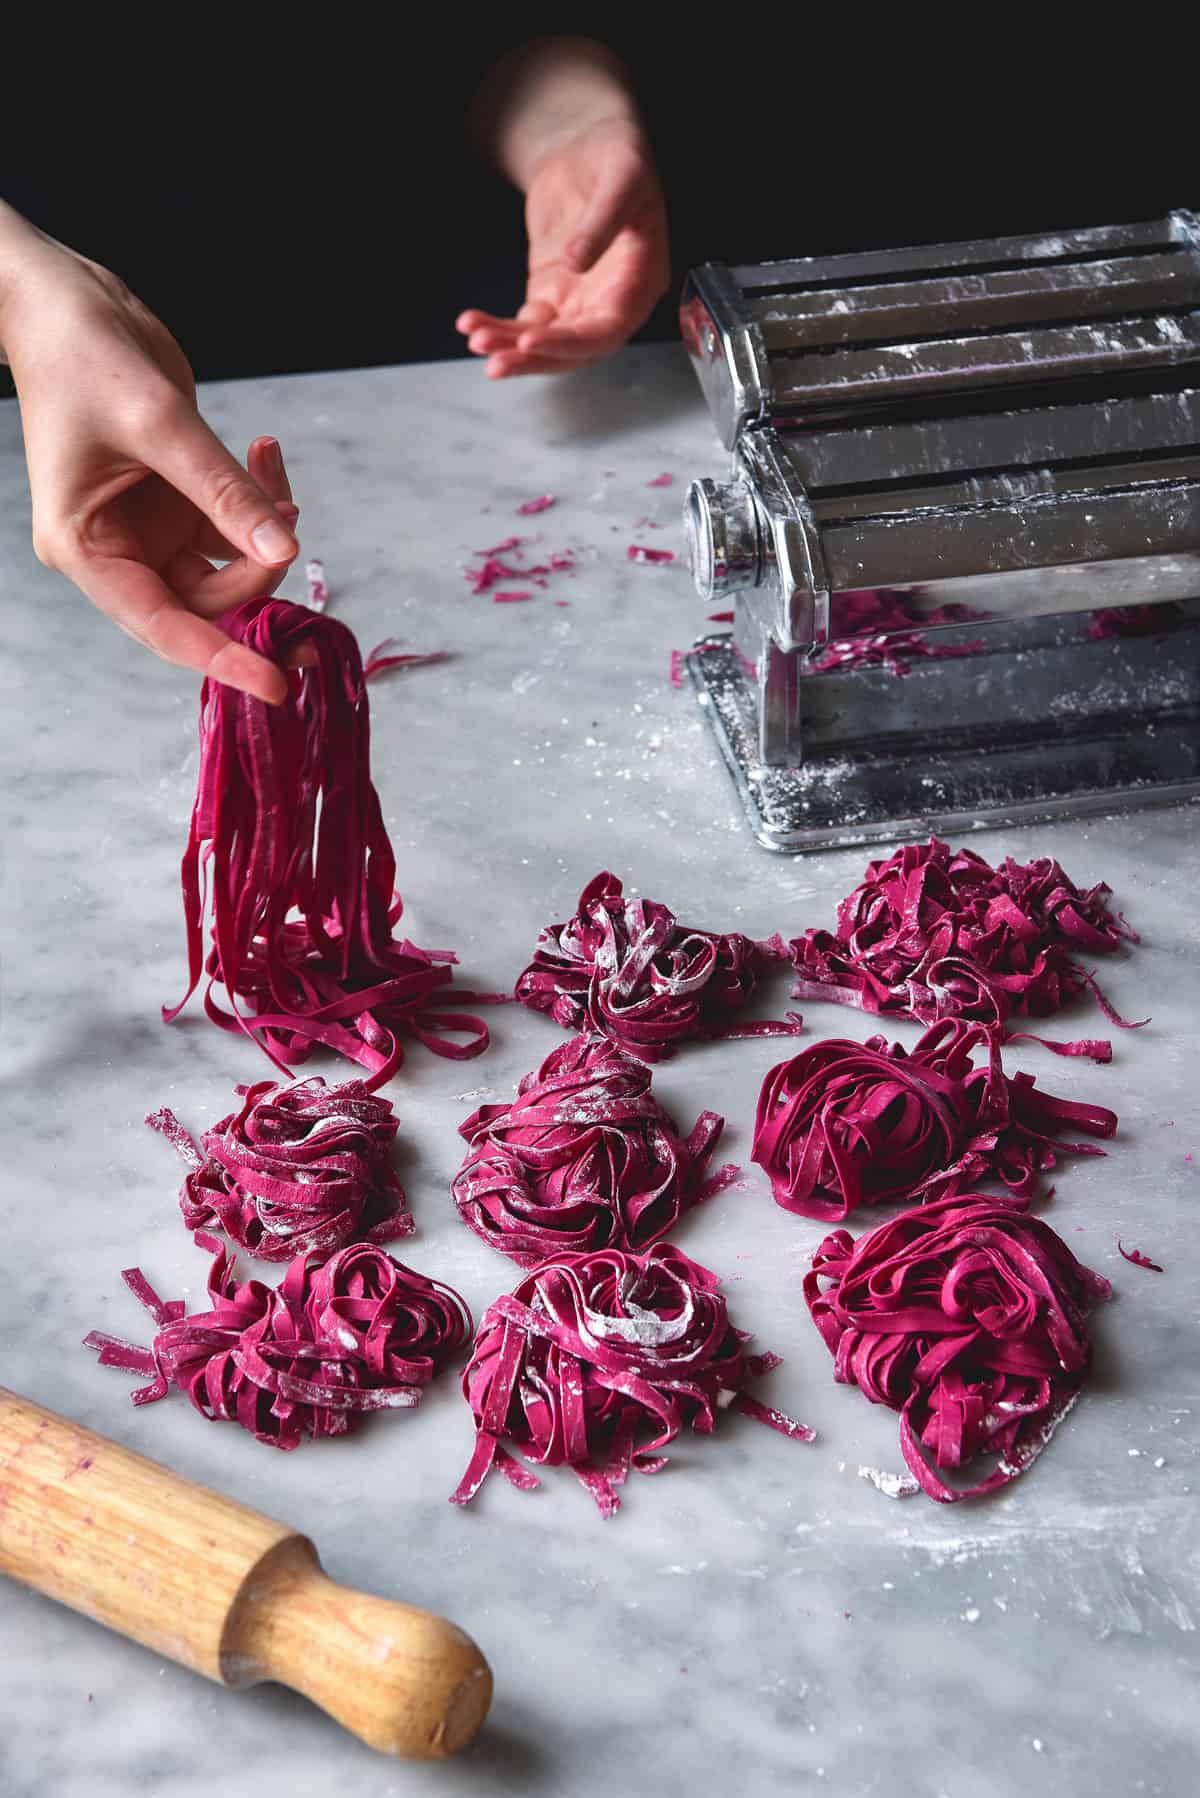 Gluten-free beetroot pasta arranged in nests atop a white marble table. A hand extends from the back corner to hold up the pasta. A pasta machine and a rolling pin surround the nests of pasta.